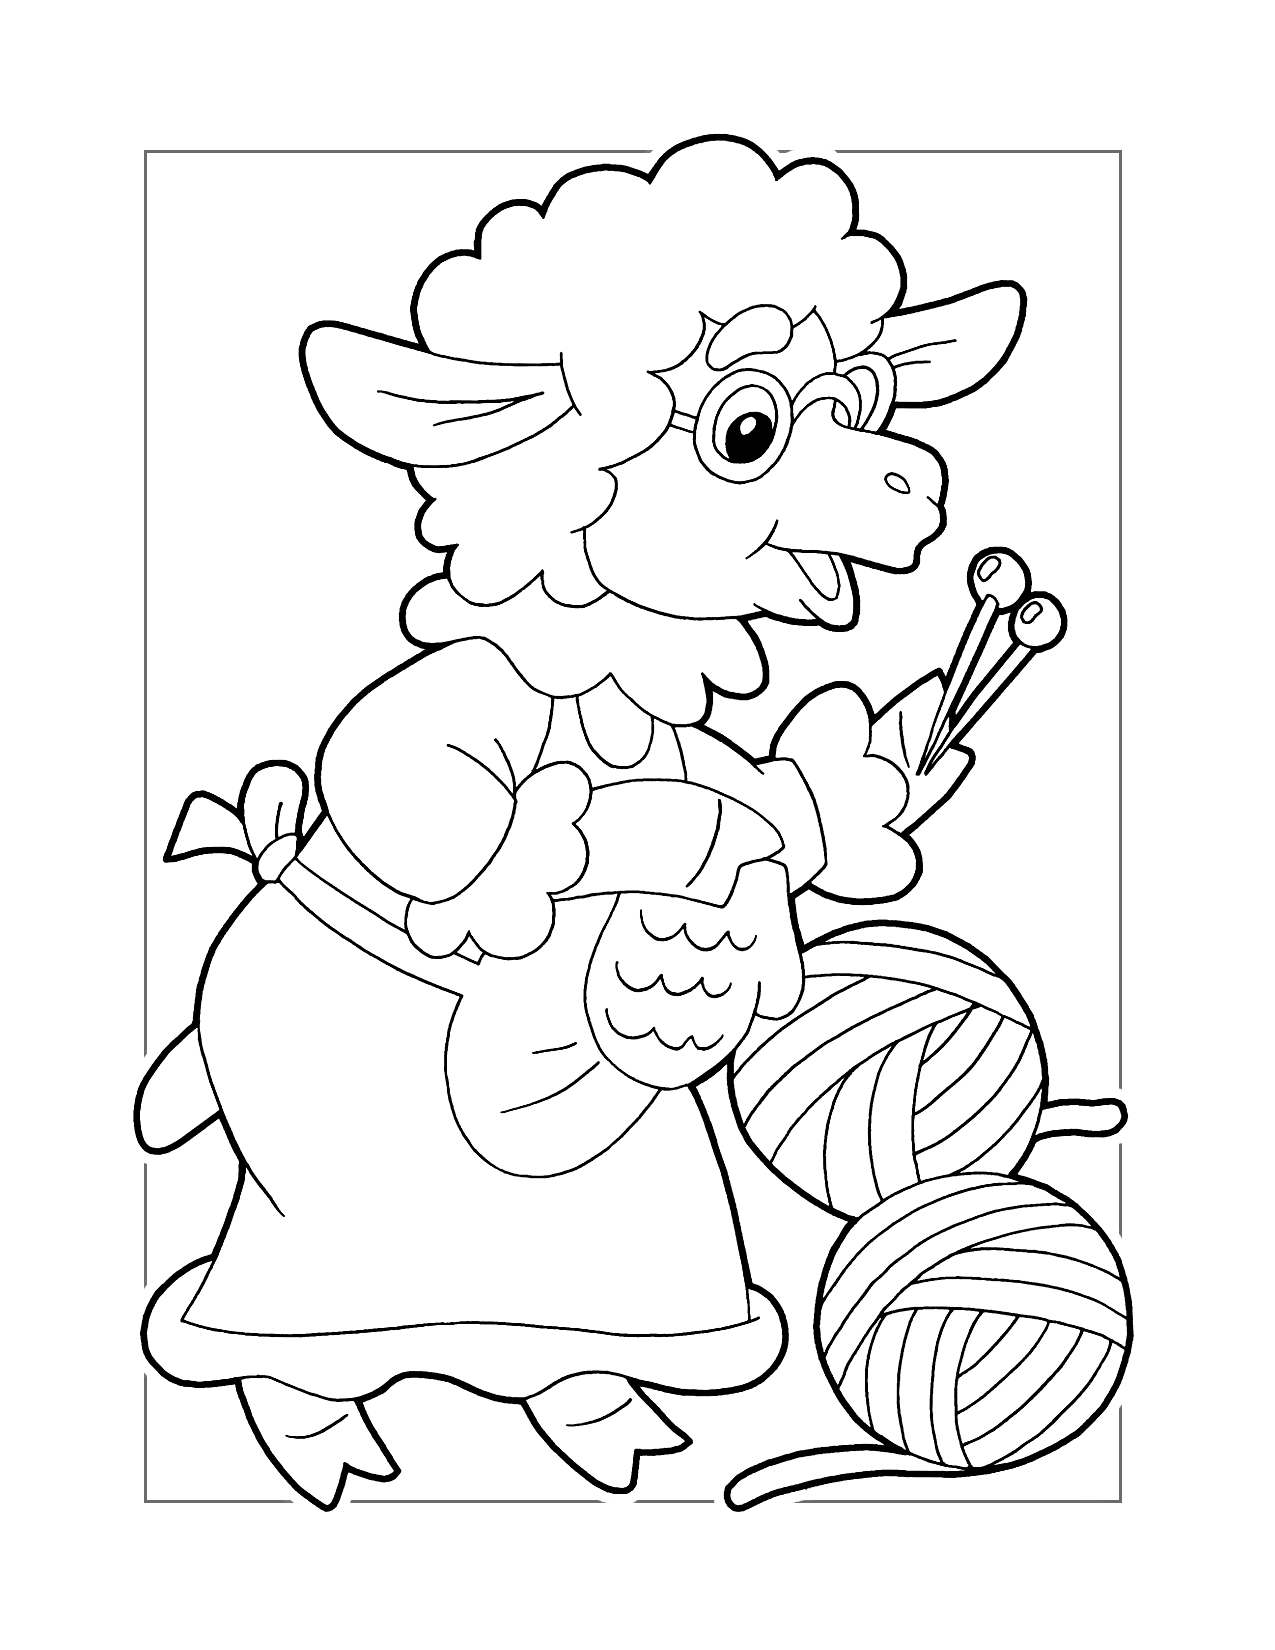 Sheep Knitting Mittens Coloring Page